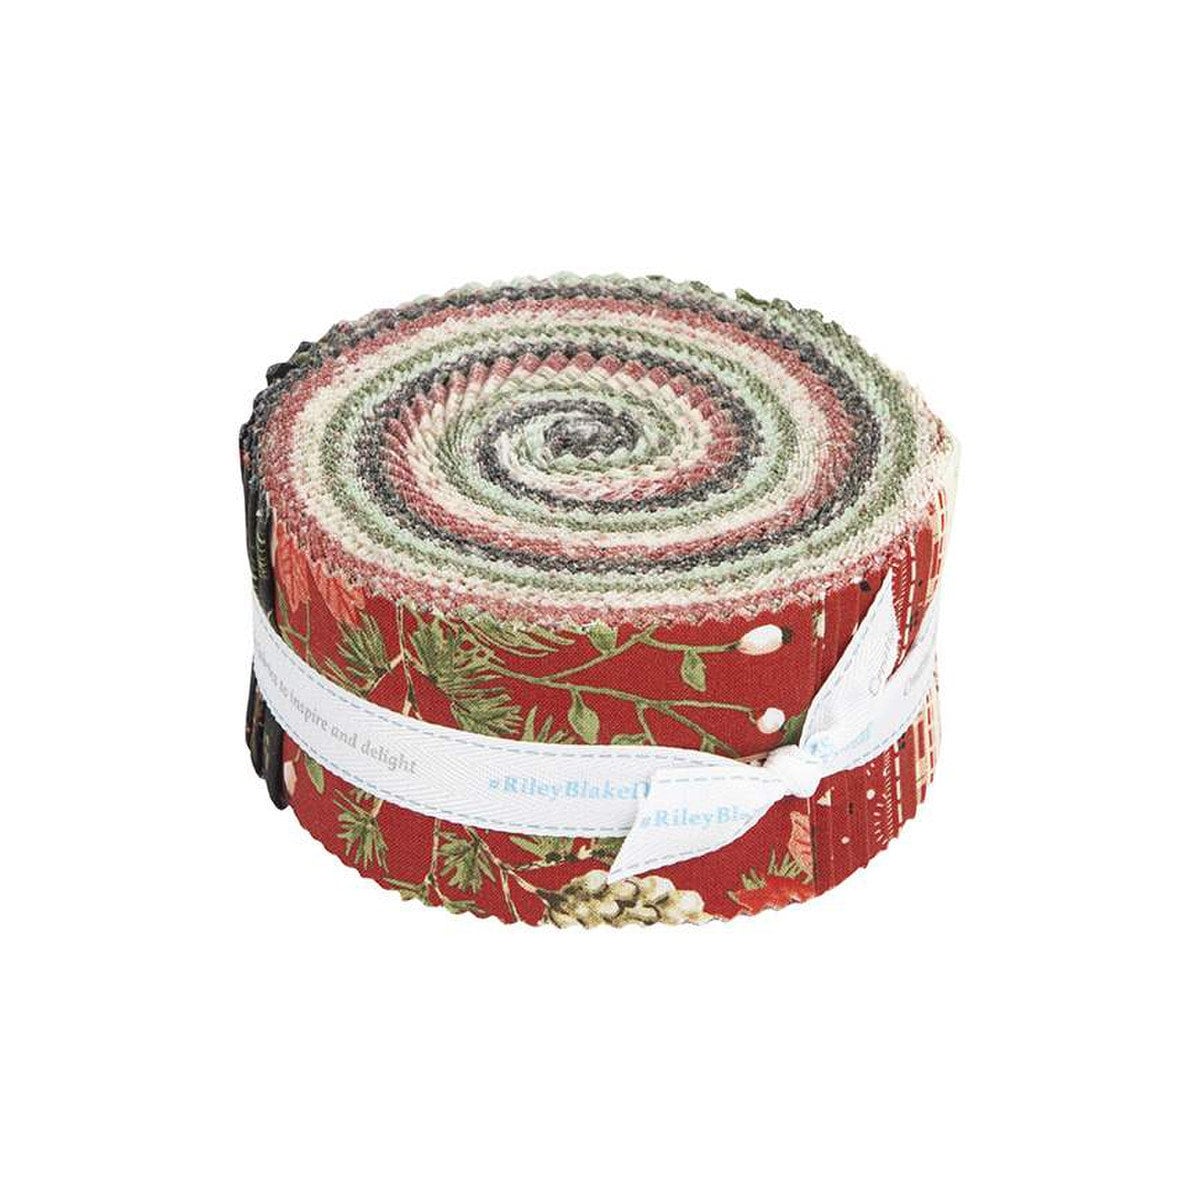 ADEL IN WINTER - Jelly Roll - 2.5 strips - Christmas - Sandy Gervais -  Riley Blake Designs - 100% cotton quilting fabric